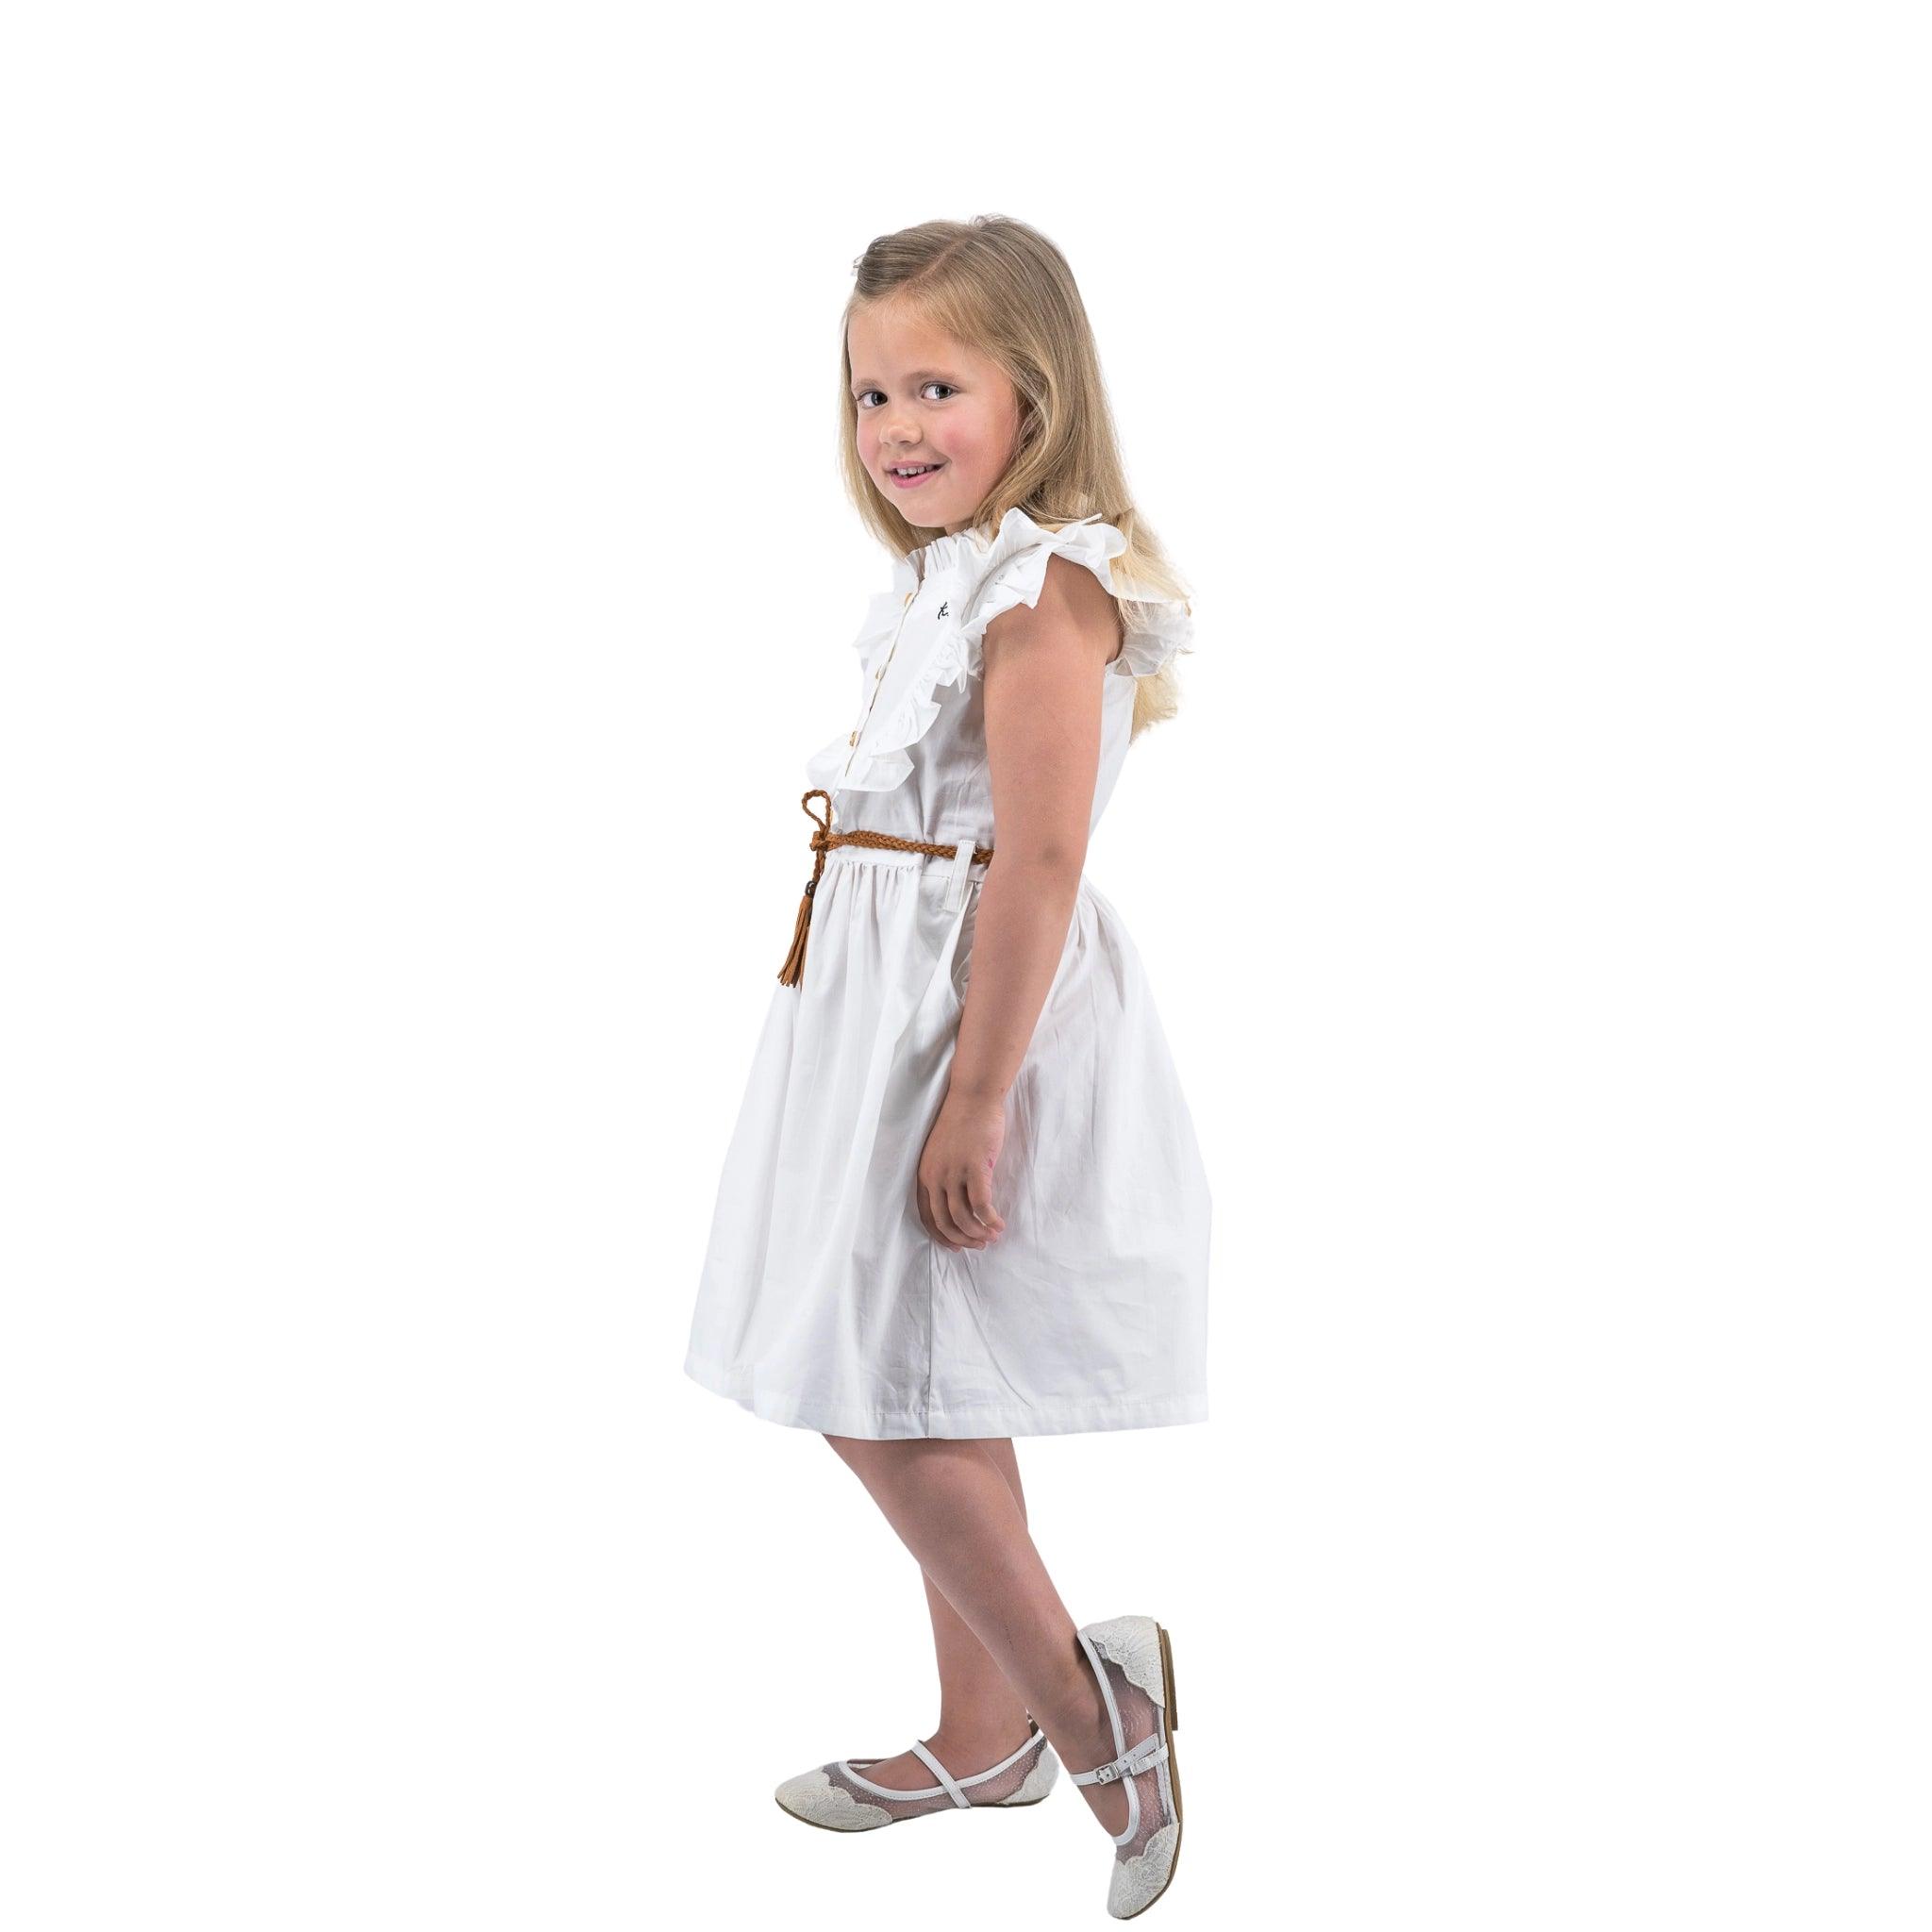 Young girl in a Karee Butterfly Sleeve Cotton Dress in White and silver shoes, smiling over her shoulder against a white background.